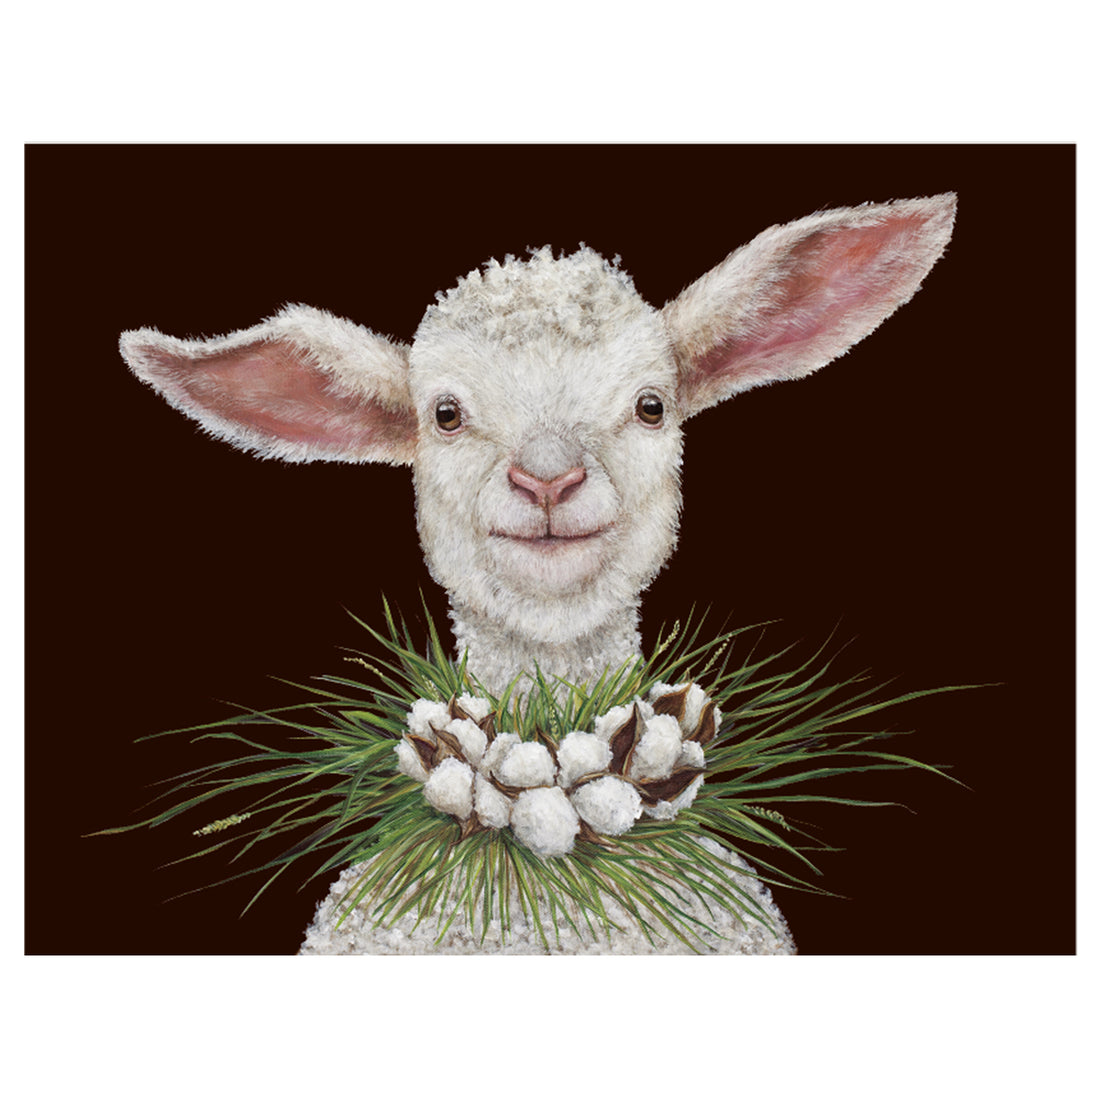 An original artwork by Vicki Sawyer depicting a sheep adorned with a wreath of pine cones called the Elizabeth Card from the brand Hester &amp; Cook.